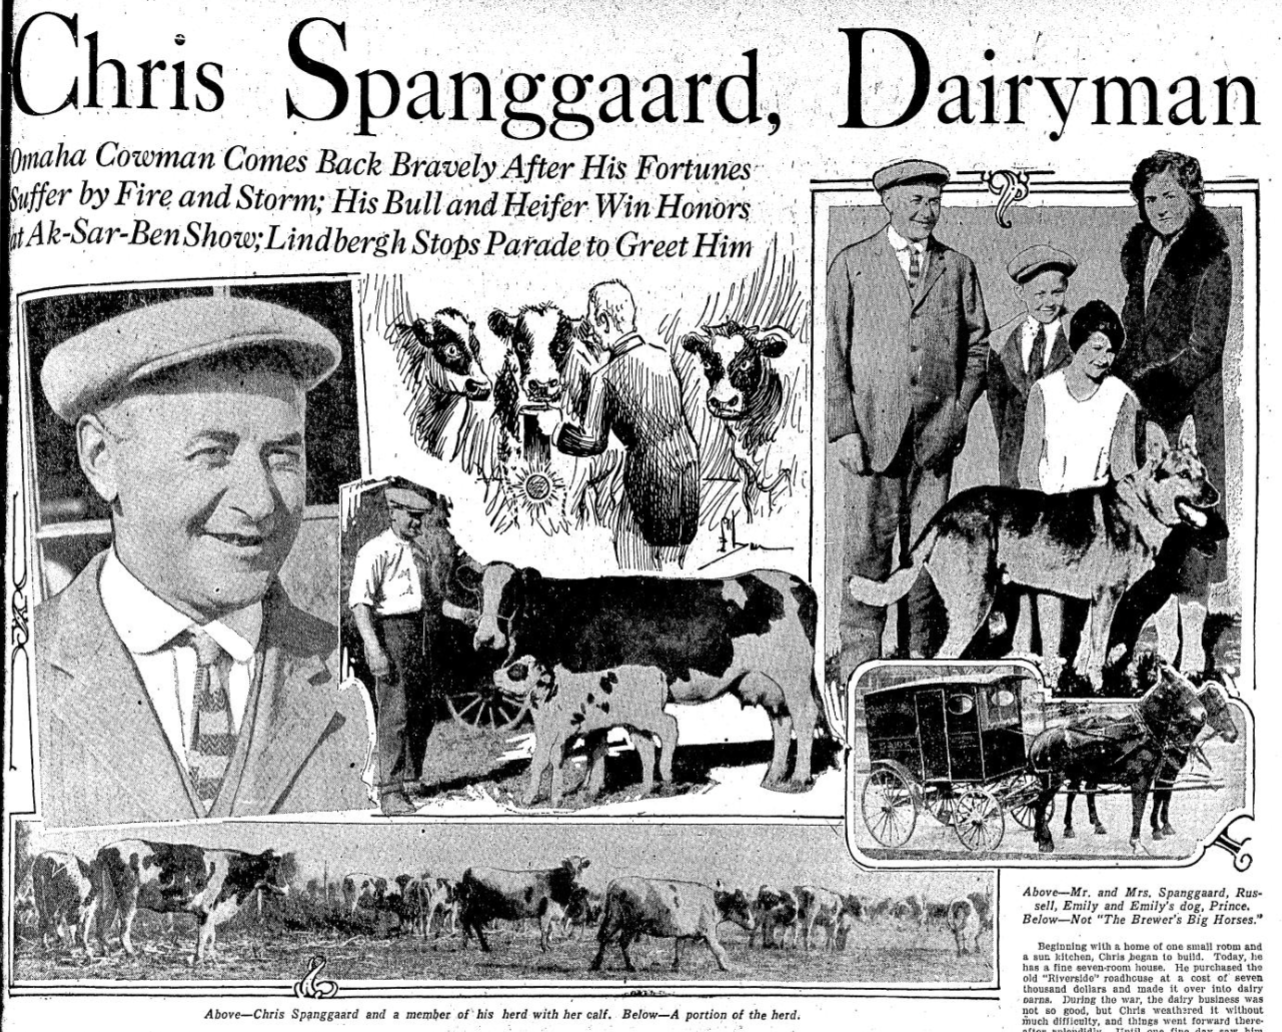 This is from a feature article about dairy farm owner and operator Chris Spangaard. The Olson Air Field was on his property. This was published on December 9, 1928 in the Omaha World-Herald.